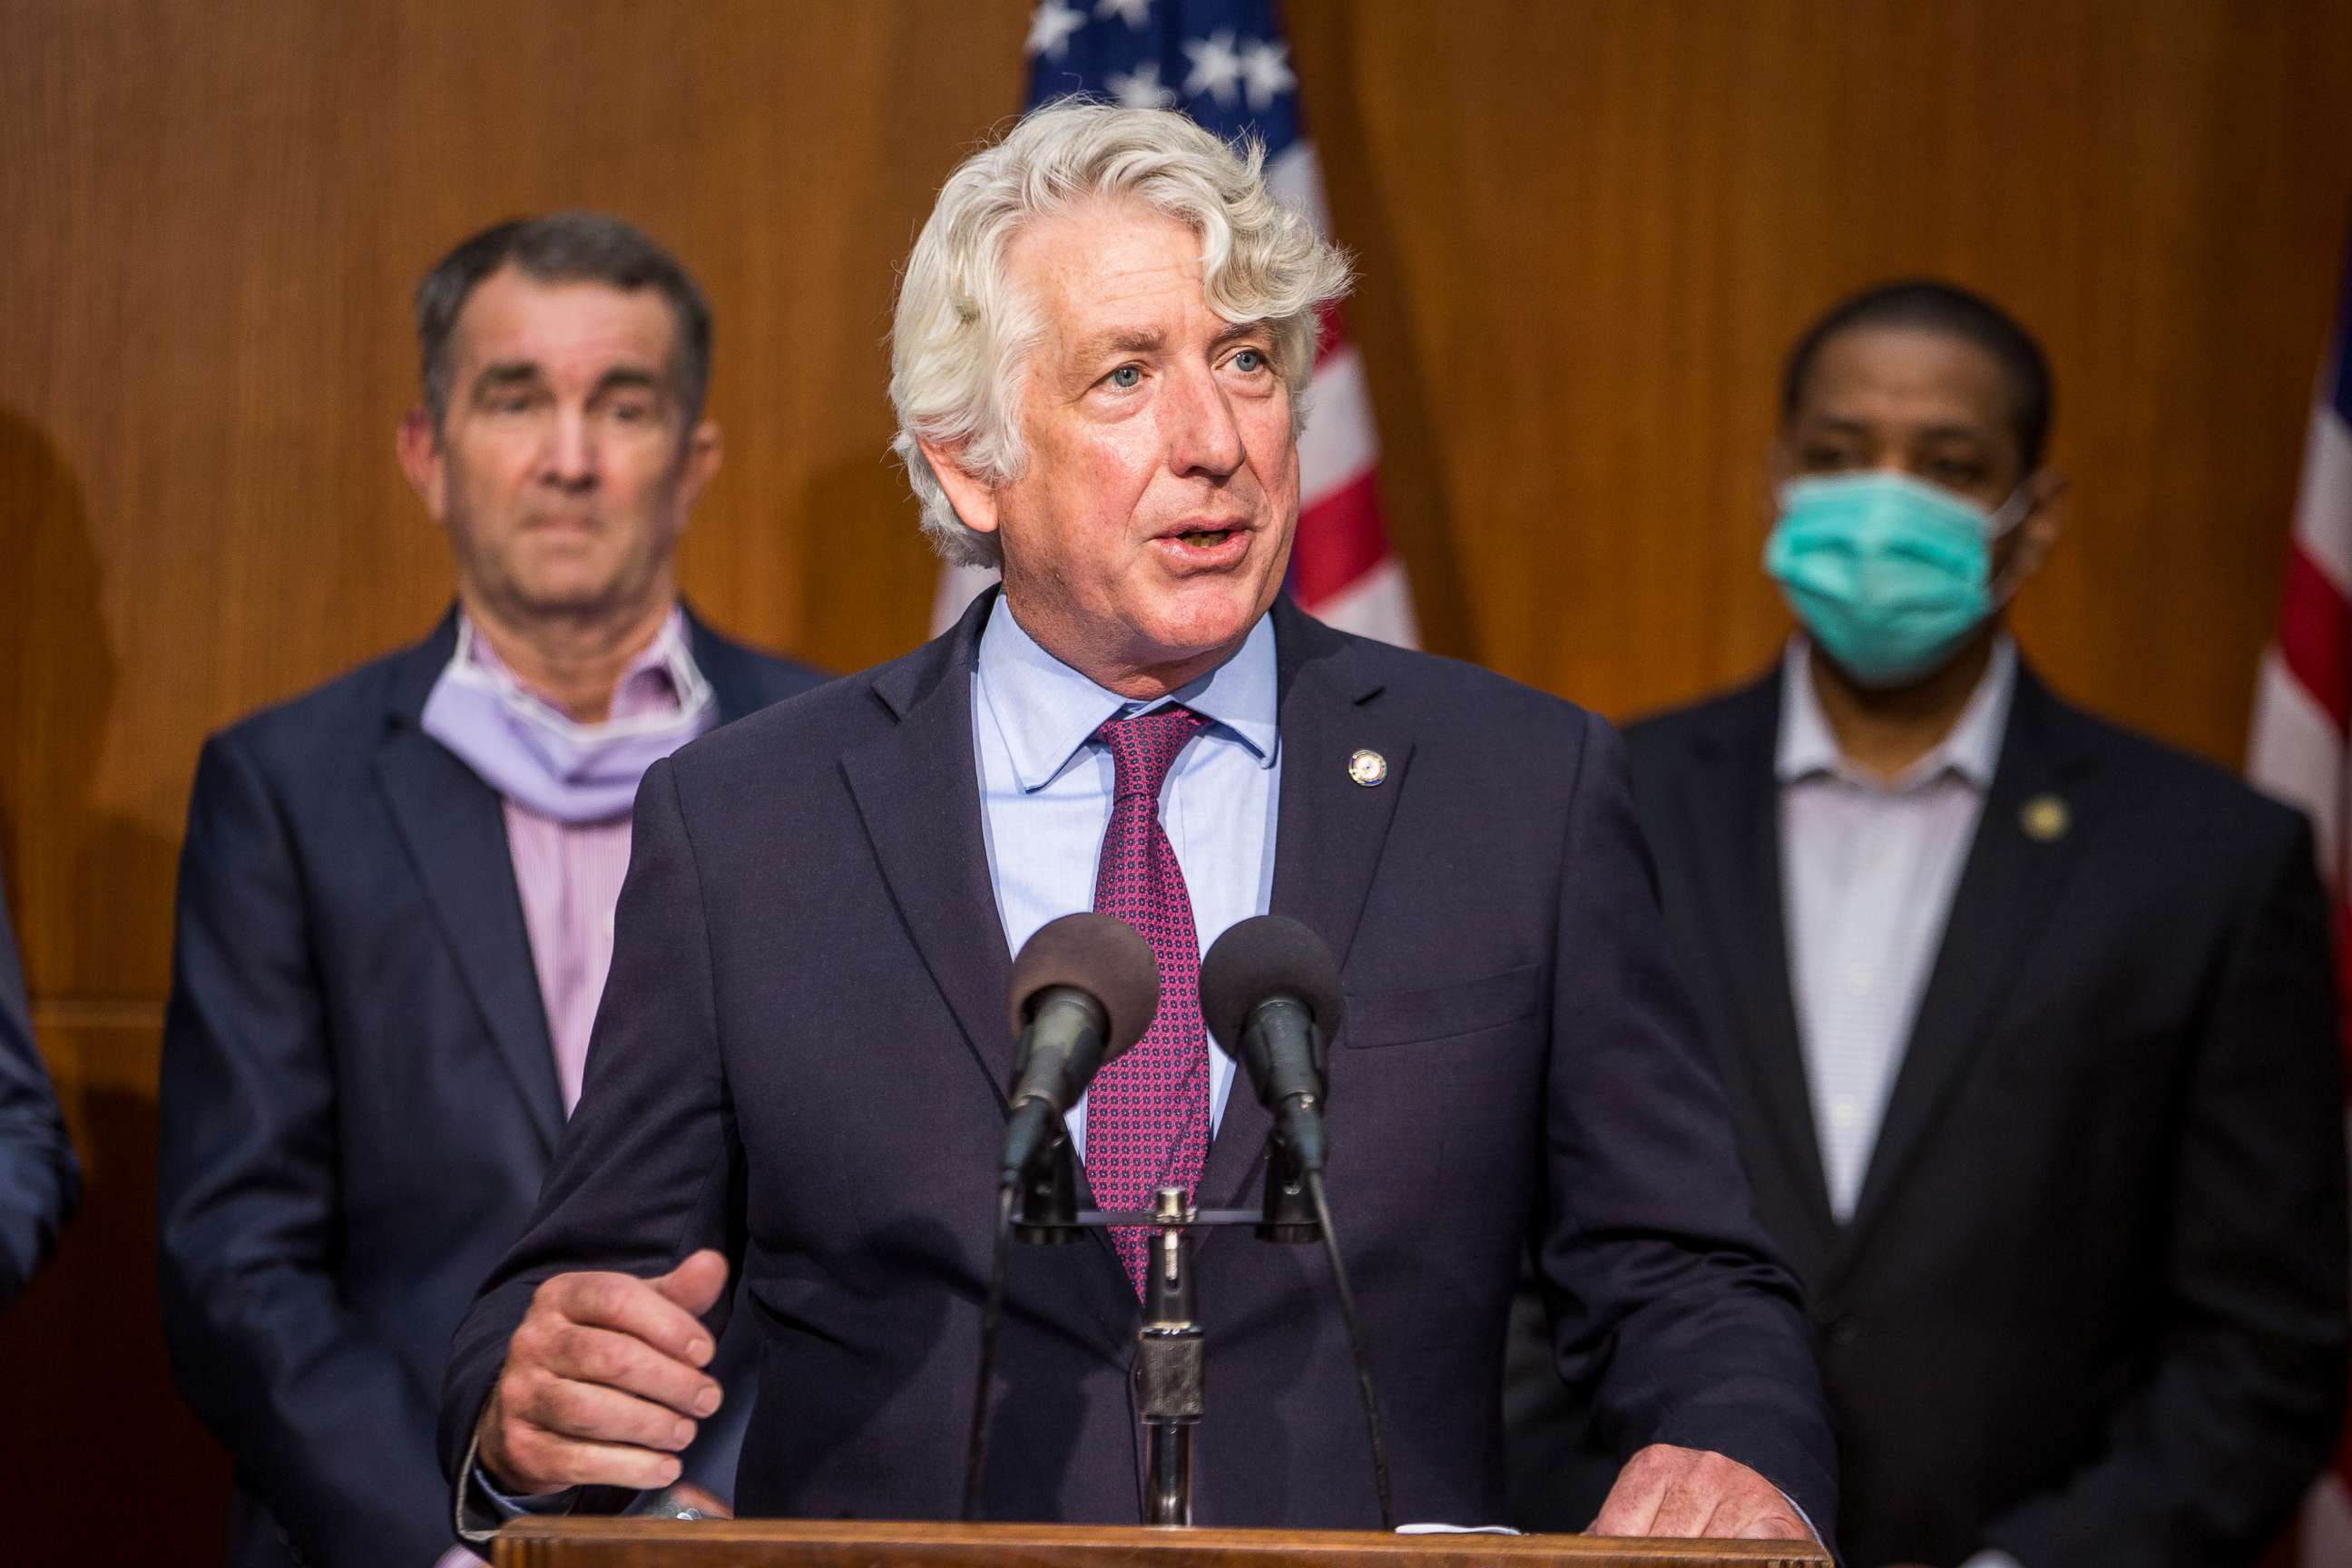 PHOTO: Virginia Attorney General Mark Herring speaks during a news conference, June 4, 2020, in Richmond, Virginia.